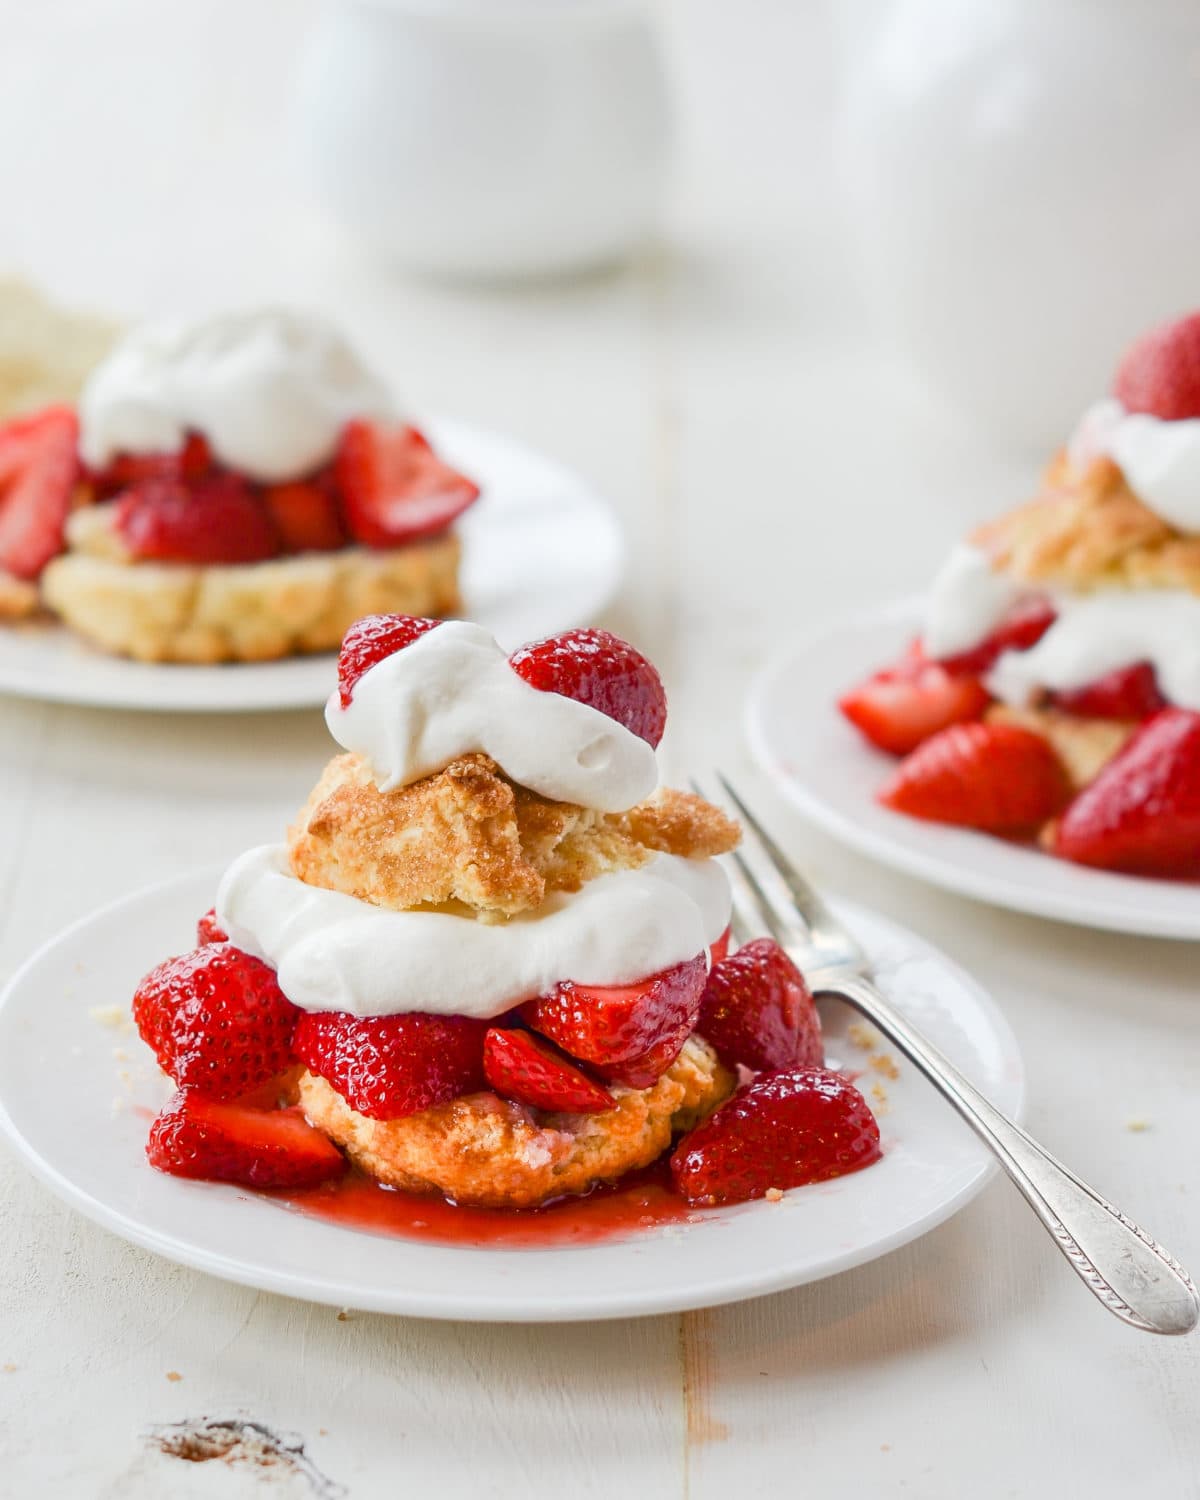 Strawberry Shortcake layered with biscuit, strawberries, and cream on a plate